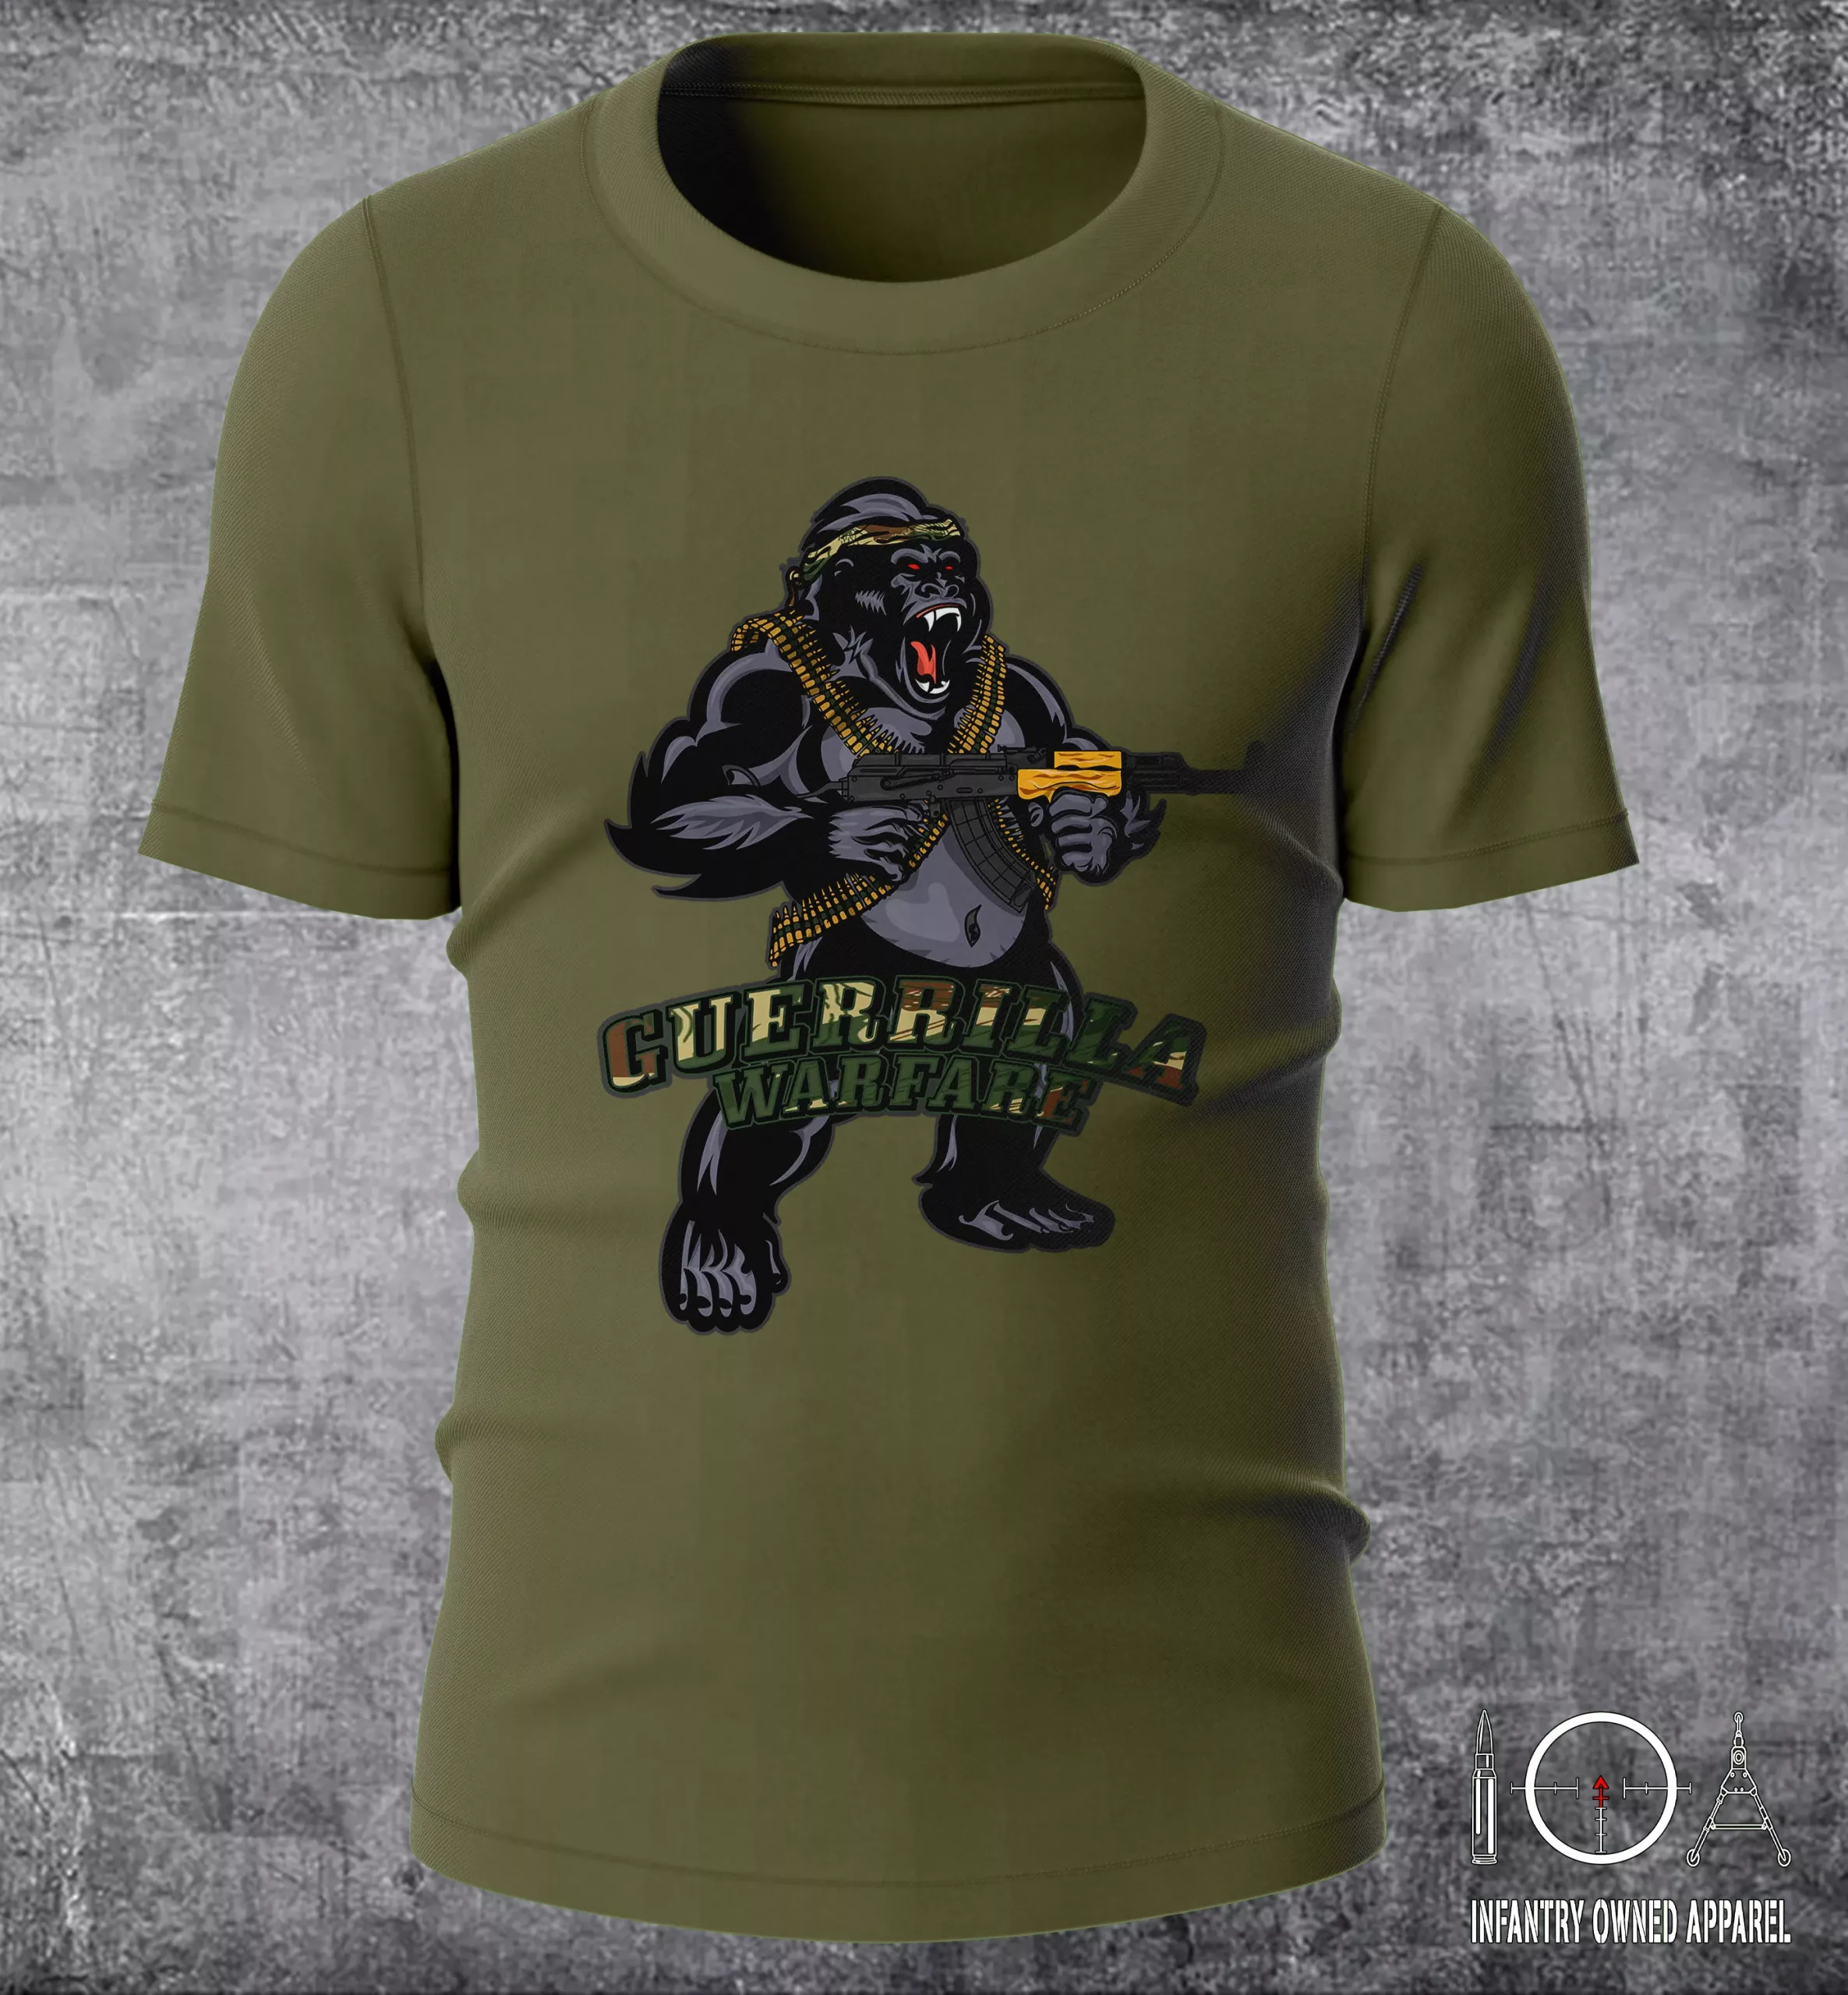 Guerrilla Warfare - Infantry Owned Apparel